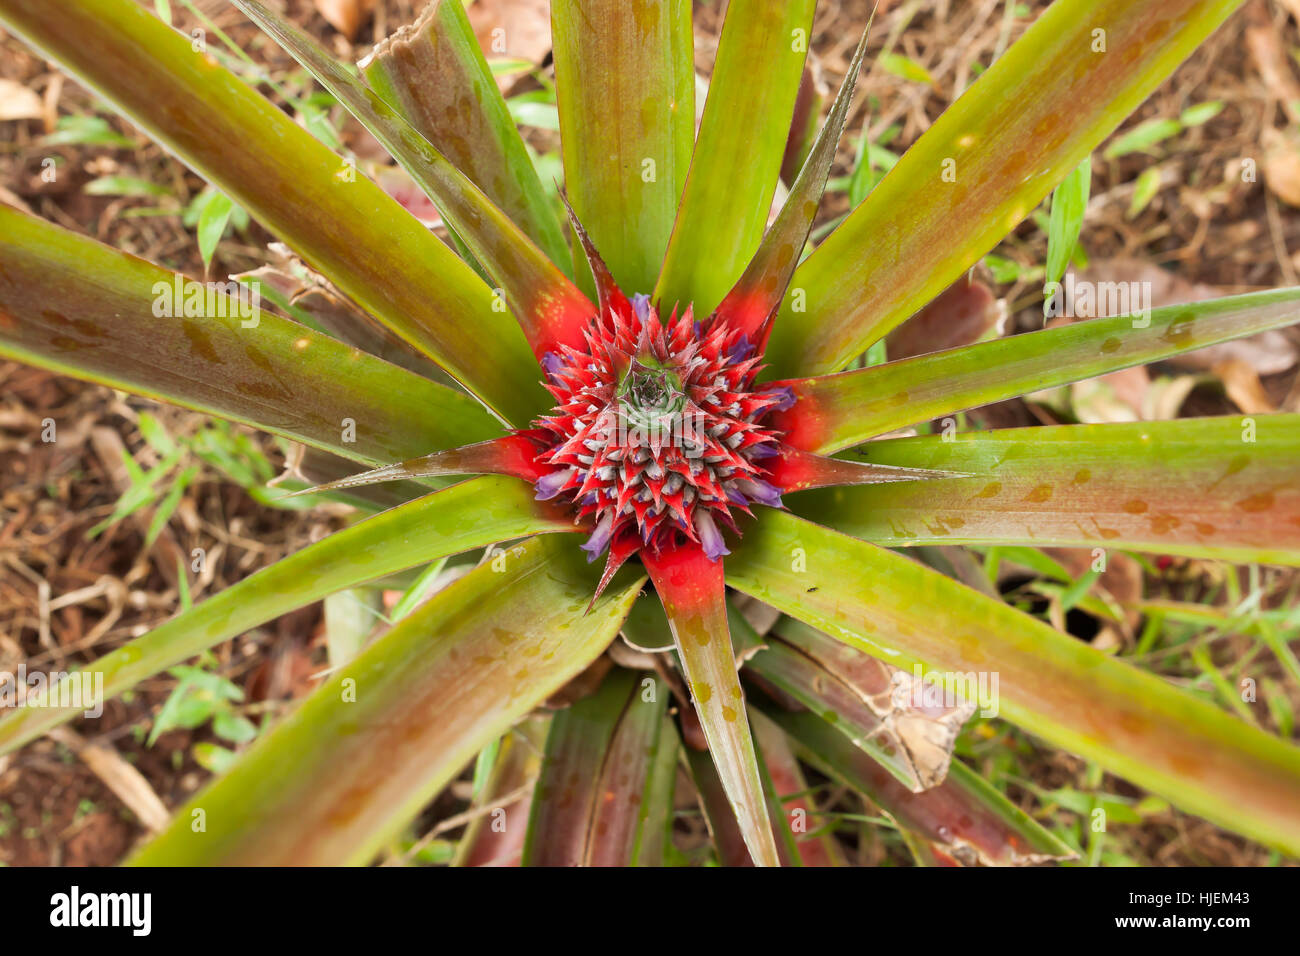 Young growing colorful pineapple in fruit and spice government plantation near Jozani forest, Zanzibar, Tanzania, Africa Stock Photo